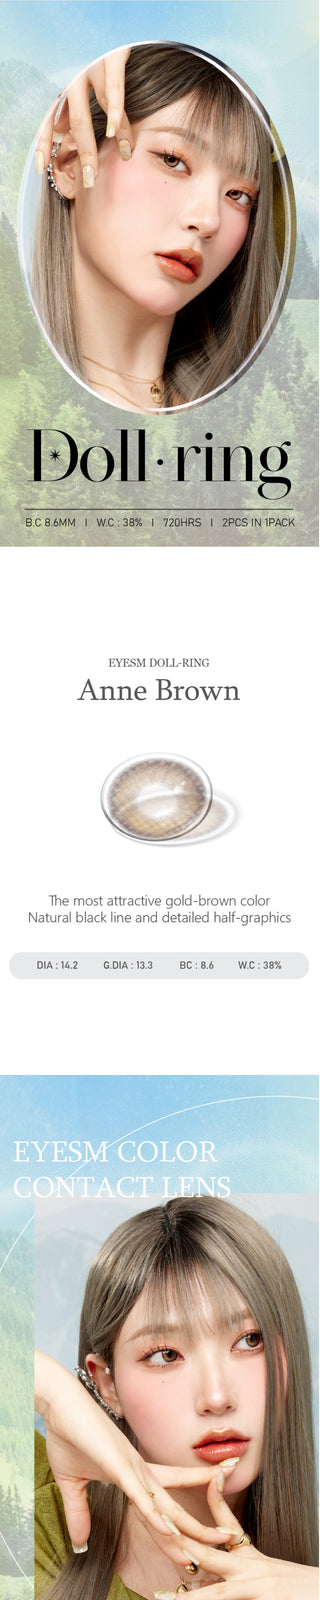 Several views of a Korean model with the Eyesm Dollring Anne Brown color contact lenses. An enlargement of a model's eyes with the prescription colored contacts, demonstrating the subtle yet striking change on dark eyes.